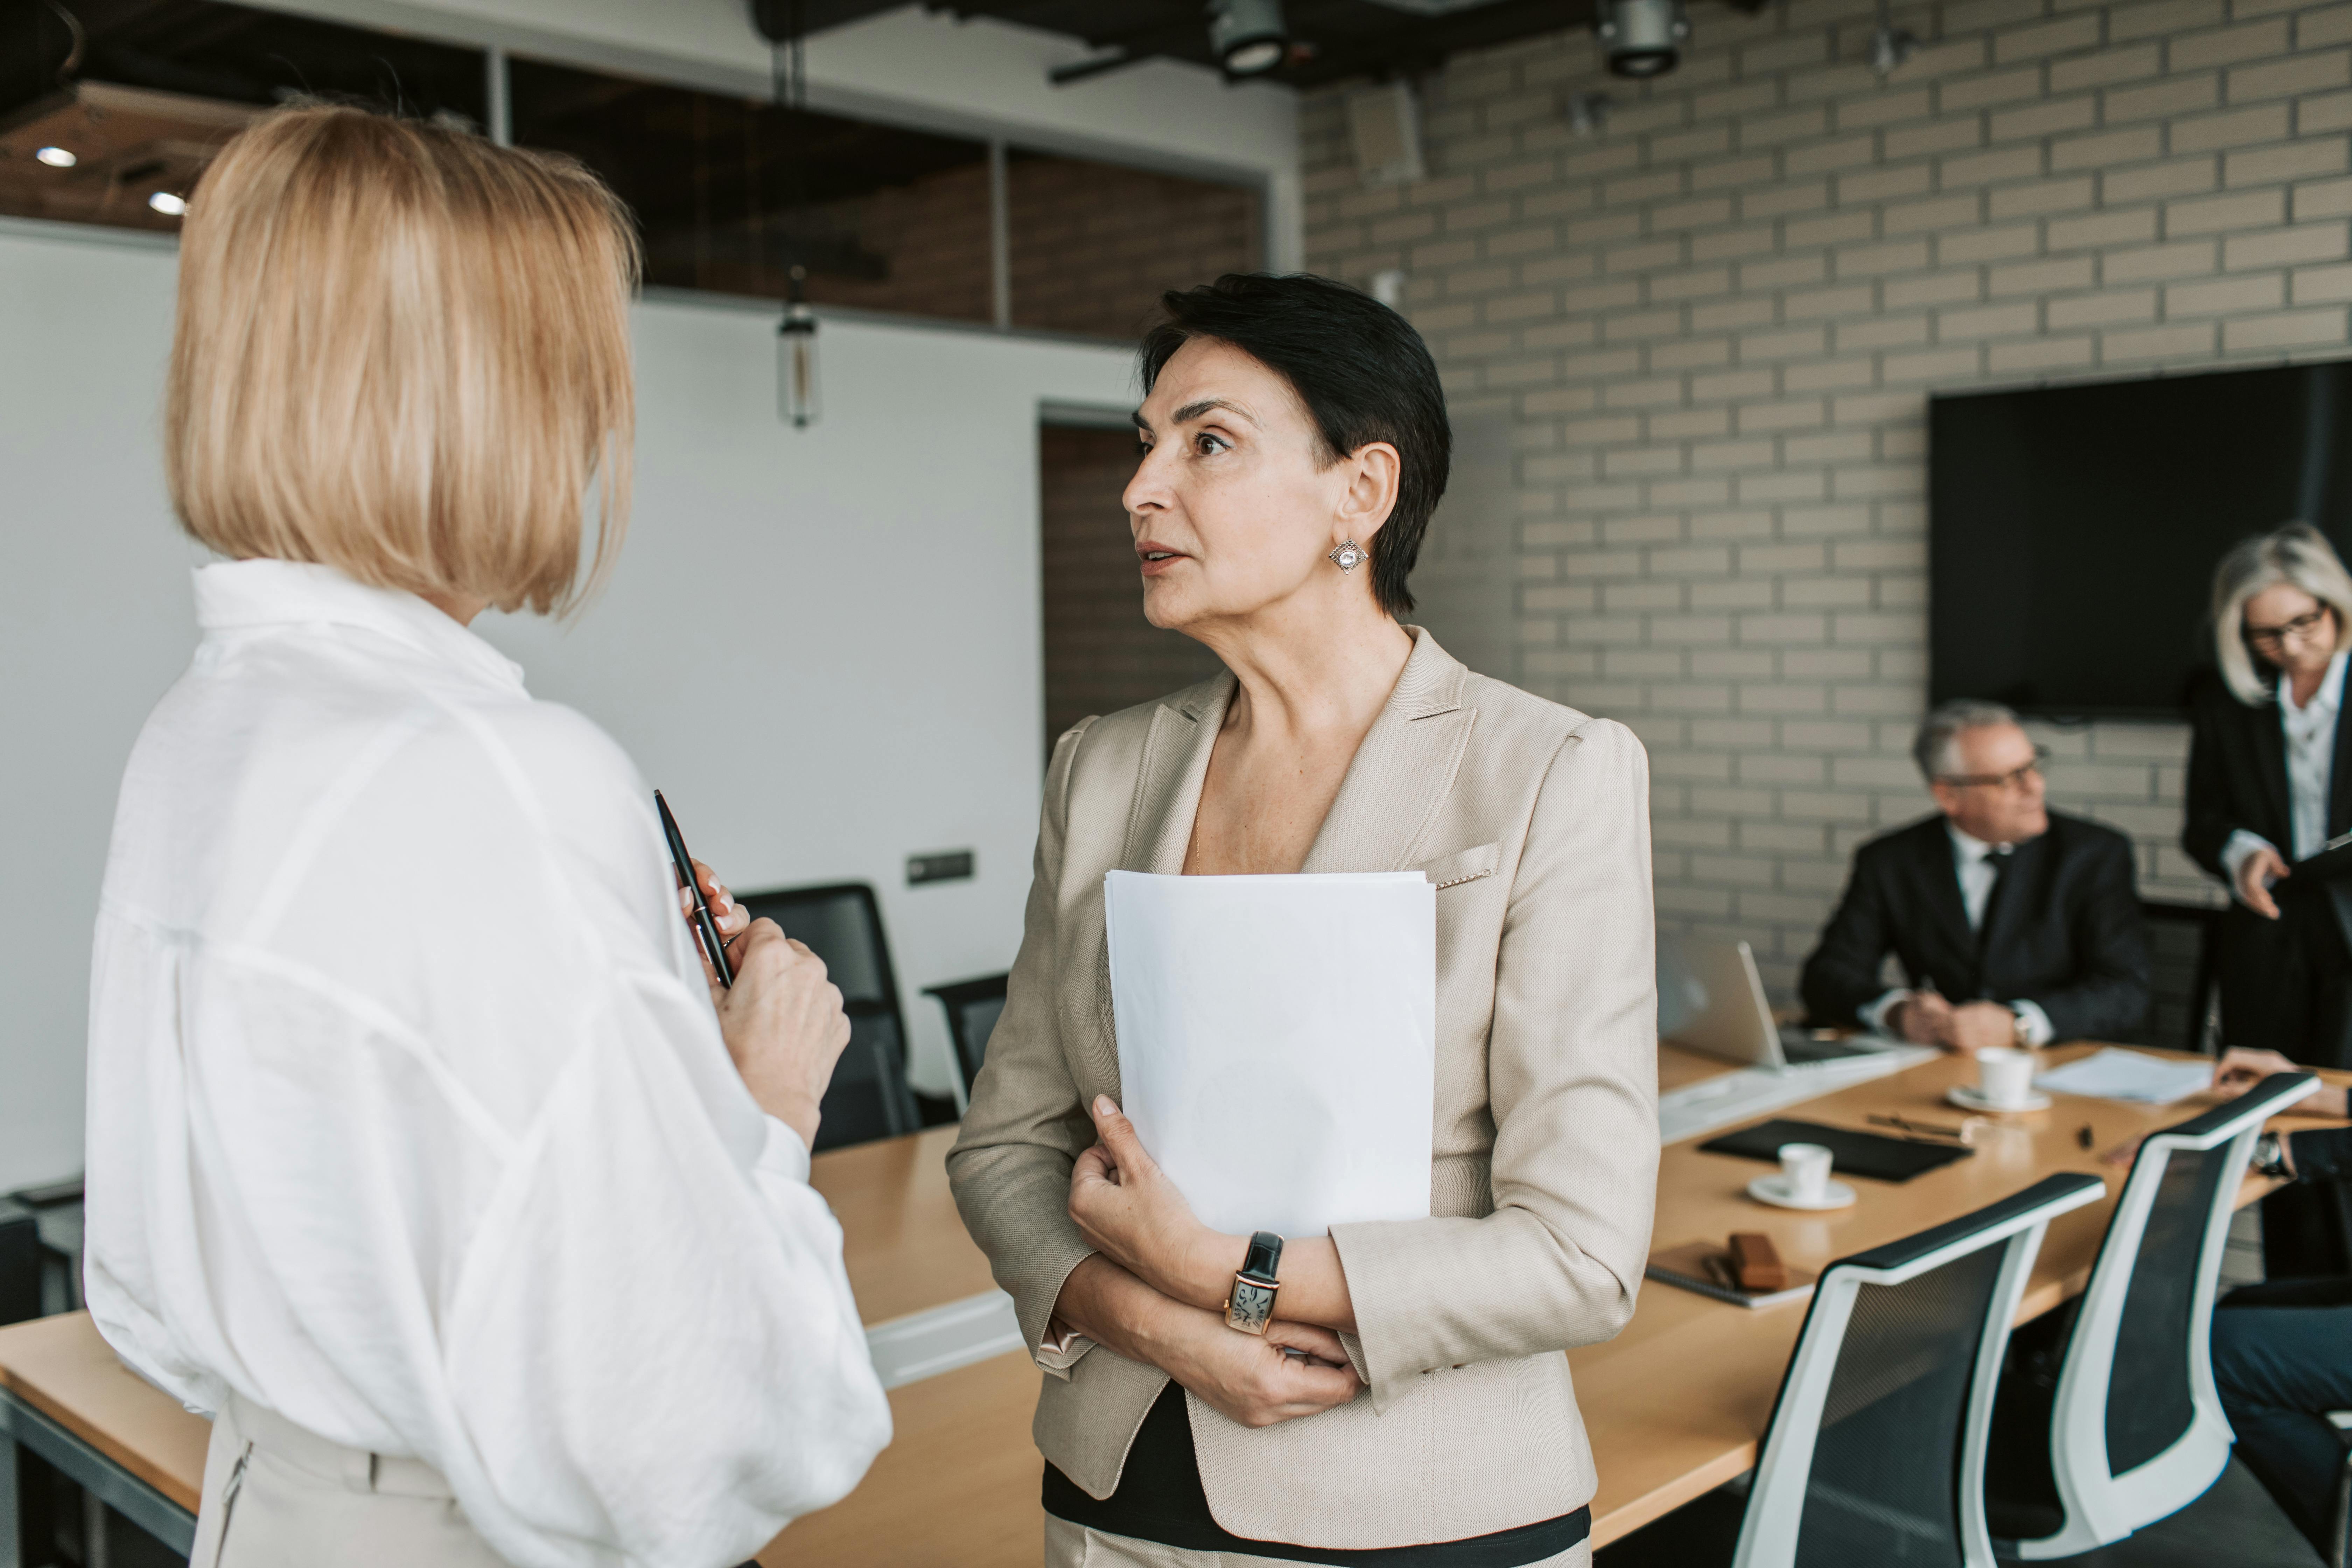 Two women talking in a boardroom while others appear in the background | Source: Pexels